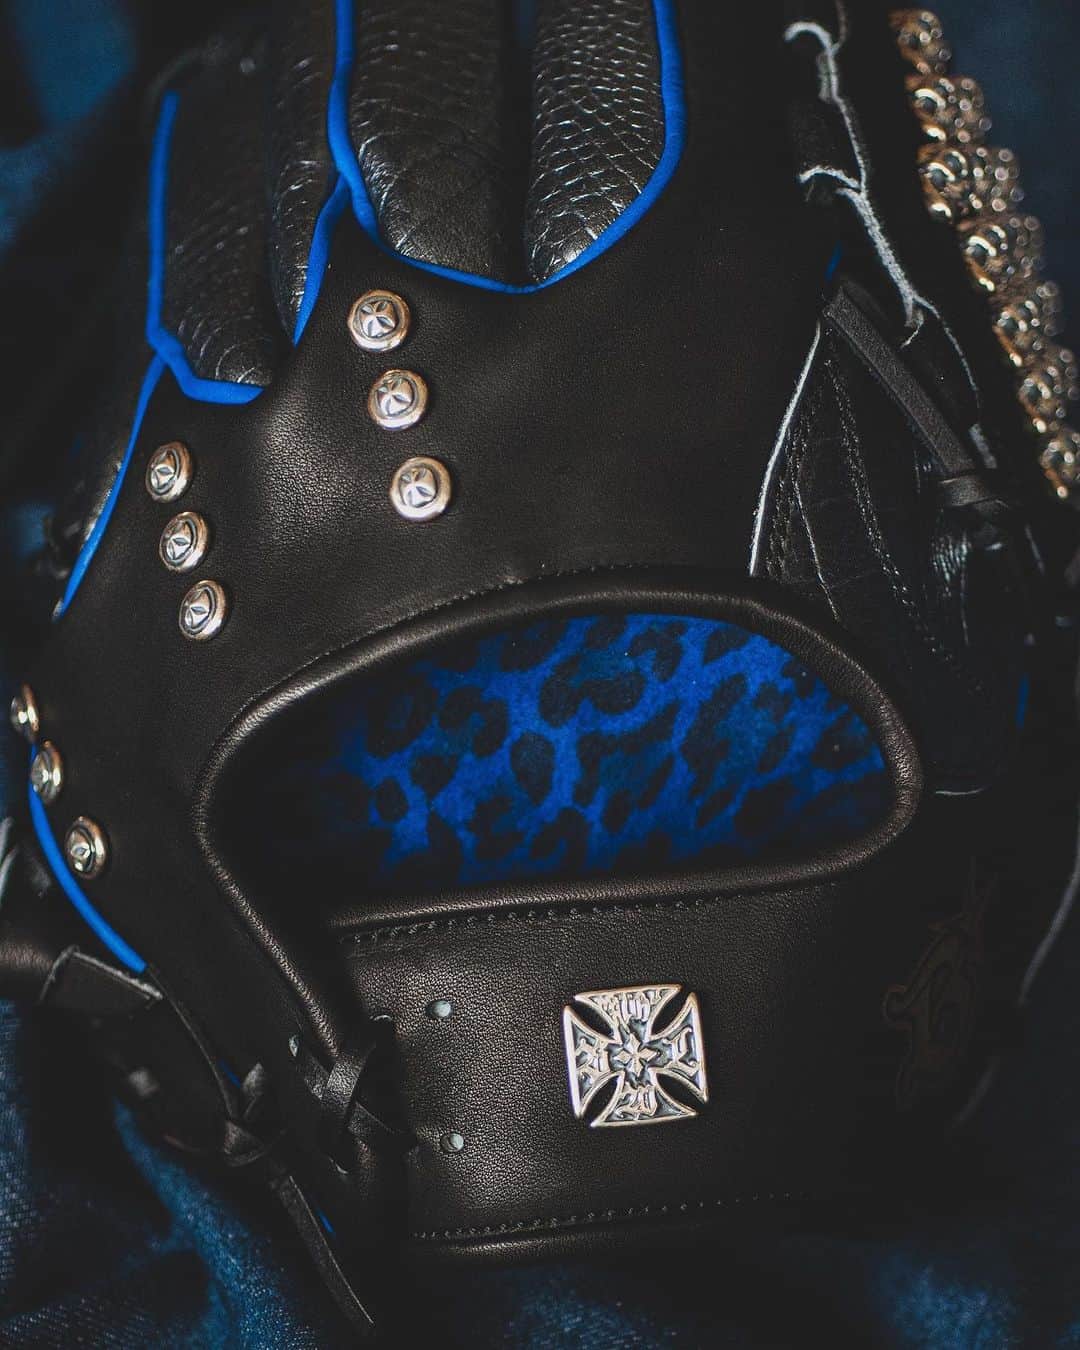 Bill Wall Leather × BEAMSさんのインスタグラム写真 - (Bill Wall Leather × BEAMSInstagram)「【Special Collaboration】Yokohama DeNA BayStars x Bill Wall Leather 2nd special collaboration  Bill Wall Leather, a silver jewelry brand established in 1985 in Malibu, California, and the Yokohama DeNA BayStars have teamed up for a special collaboration project (Produced by BEAMS)！  On March 31st (Friday), BAYSTORE ONLINE will release its second collaboration item with Bill Wall Leather, one of the world's leading silver jewelry brands! This time, the items are a pair of functional gloves with gorgeous visuals and using many silver parts, and an Italian horsehide baseball shirt made entirely in a workshop in Malibu, including the material's cutting and sewing. Both are one-of-a-kind designs that you won't find anywhere else.  ・These products will not be sold on the official Bill Wall Leather website or BEAMS ・These products will be sold only at BAYSTORE HOME and BAYSTORE ONLINE ・Click here for the order period and details⇒ https://www.baystars.co.jp/news/2023/03/0329_05.php   ＿＿＿＿＿＿＿＿＿＿ 〈横浜DeNAベイスターズ × Bill Wall Leather〉スペシャルコラボレーション 第2弾  カリフォルニア州マリブにて1985年に誕生したシルバージュエリーブランド〈Bill Wall Leather〉と〈横浜DeNAベイスターズ〉とのスペシャルコラボレーション企画 第2弾（Produced by BEAMS）の登場です！  3月31日(金)よりBAYSTORE ONLINE限定で、世界有数のシルバージュエリーブランド〈Bill Wall Leather〉とのコラボレーションアイテム 第2弾を受注発売致します！今回のアイテムは、シルバーパーツをふんだんに使用し豪華なビジュアルながら実使用可能なグローブと、素材の裁断や縫製に至るまで、全ての工程をマリブの工房で行ったイタリア製馬革のベースボールシャツです。どちらも他では目にする事のない唯一無二のデザインとなっています。  ・Bill Wall Leather オフィシャルサイト、及びBEAMSでの販売はございません。 ・本企画品は、BAYSTORE HOME、BAYSTORE ONLINEのみでの販売となります。  ・受注期間、詳細はコチラまで ⇒ https://www.baystars.co.jp/news/2023/03/0329_05.php ＿＿＿＿＿＿＿＿＿＿ #yokohamadenabaystars #billwallleather #beamsville」3月30日 19時57分 - billwallleather_beams